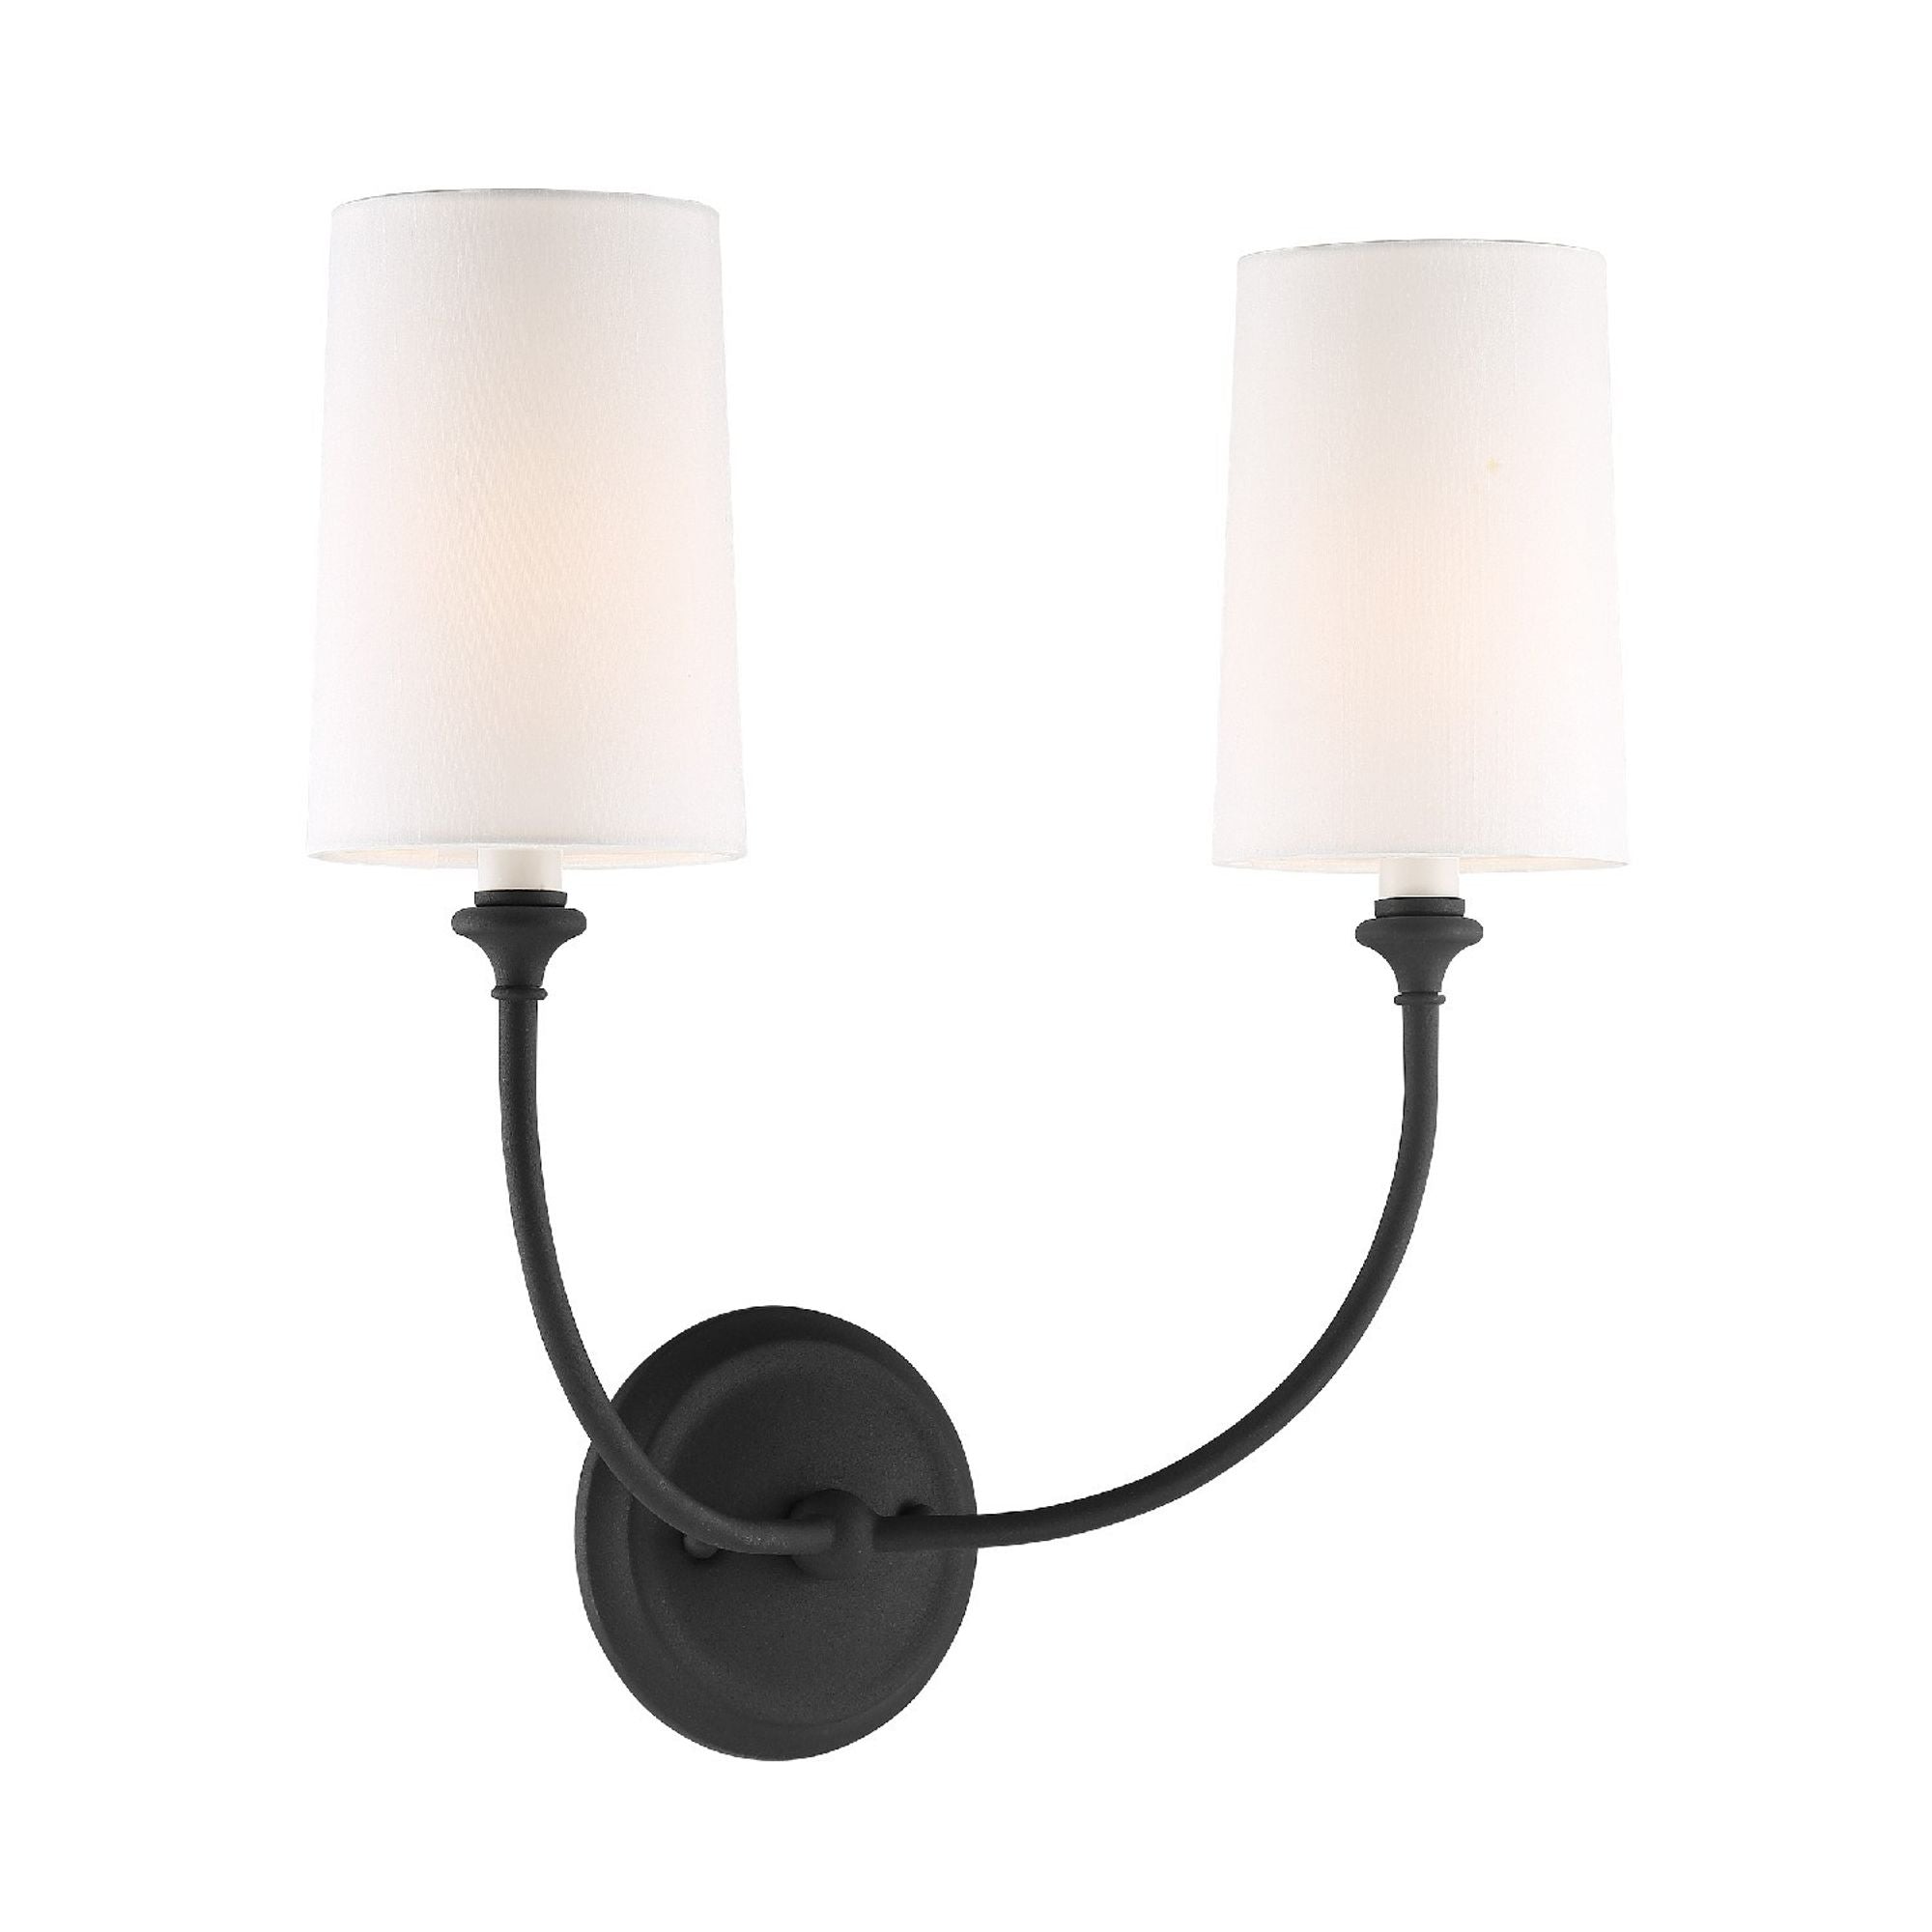 Libby Langdon for Crystorama Sylvan 2 Light Black Forged Sconce